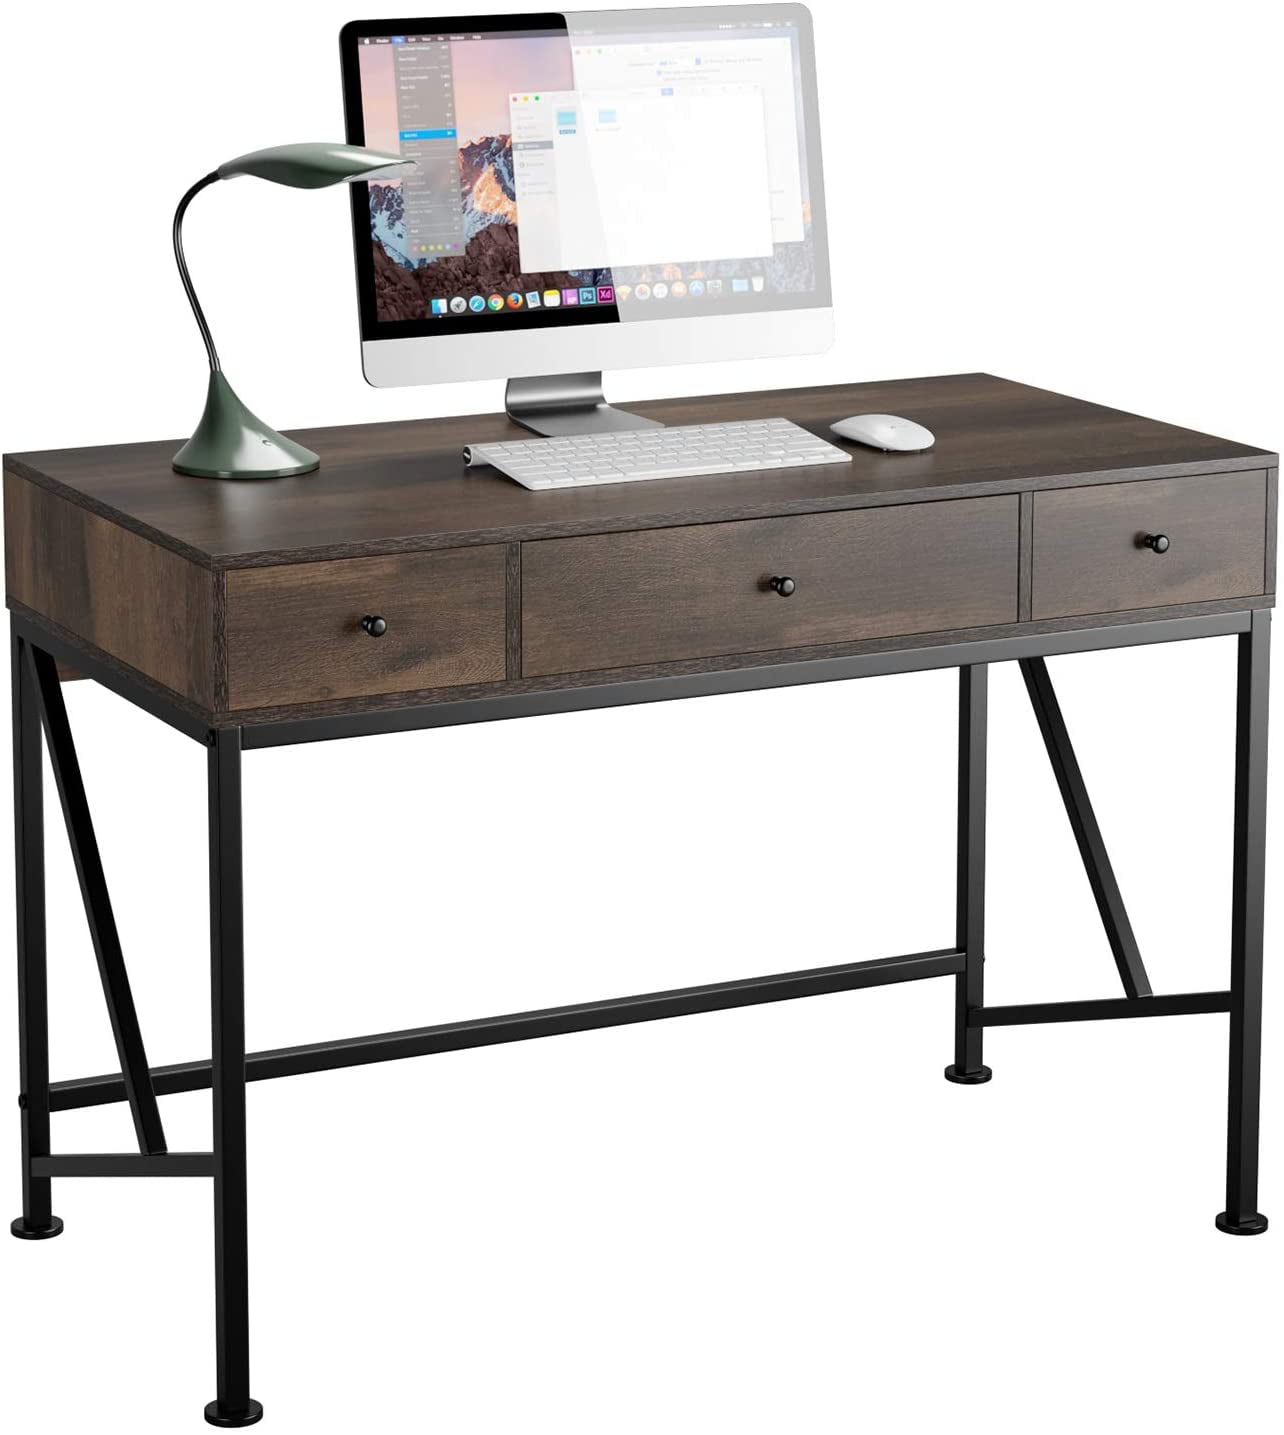 MISSHE Home Office Computer Desk Rustic Brown 42 Writing Desk with 1 Storage Shelve Modern Simple Study Wooden Metal Frame Desk with Adjustable Leg Pads 